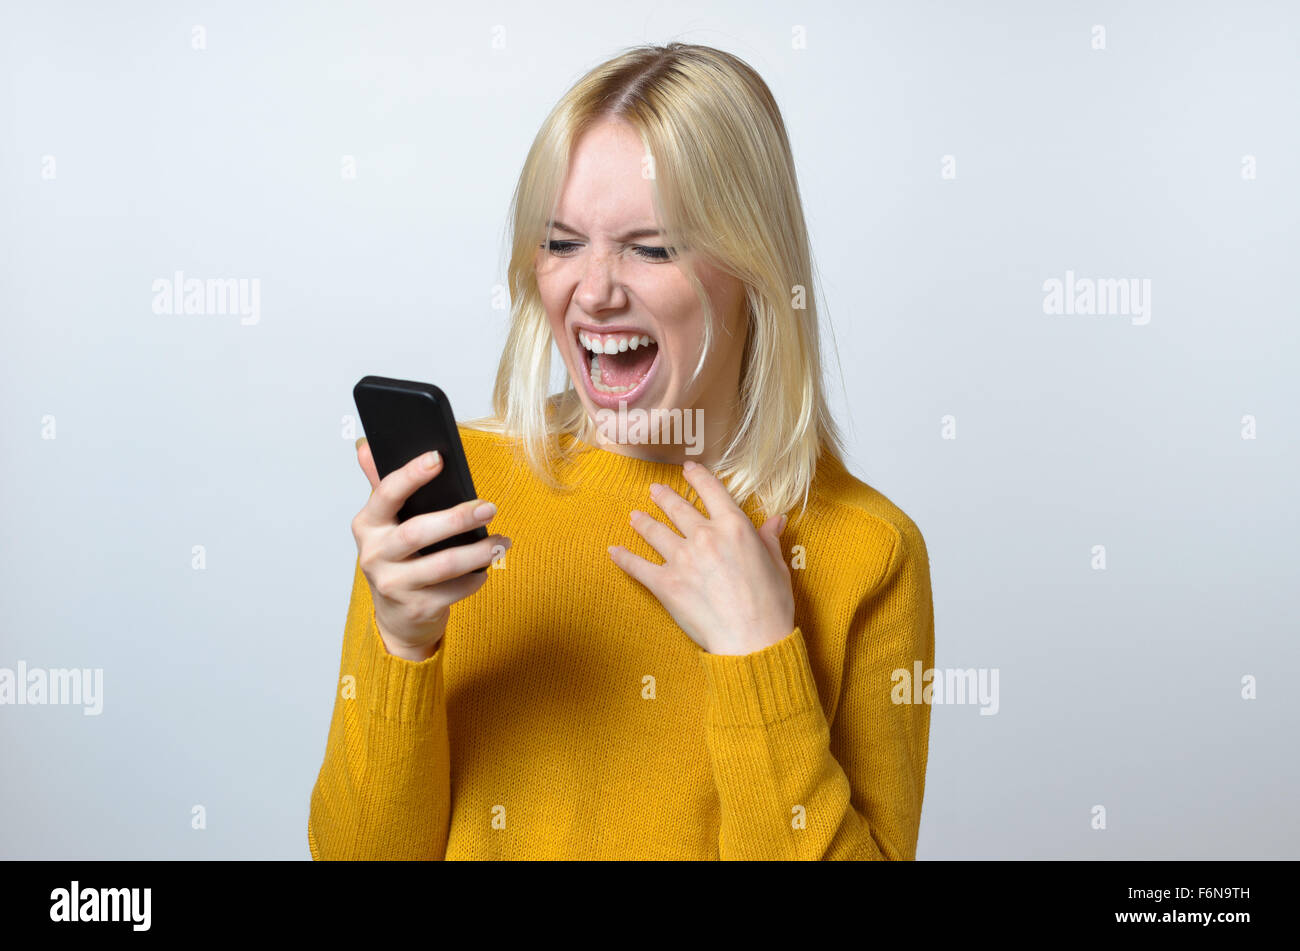 Blond Young Woman Showing Shocked Expression While Looking at her Mobile Phone Against White Background. Stock Photo